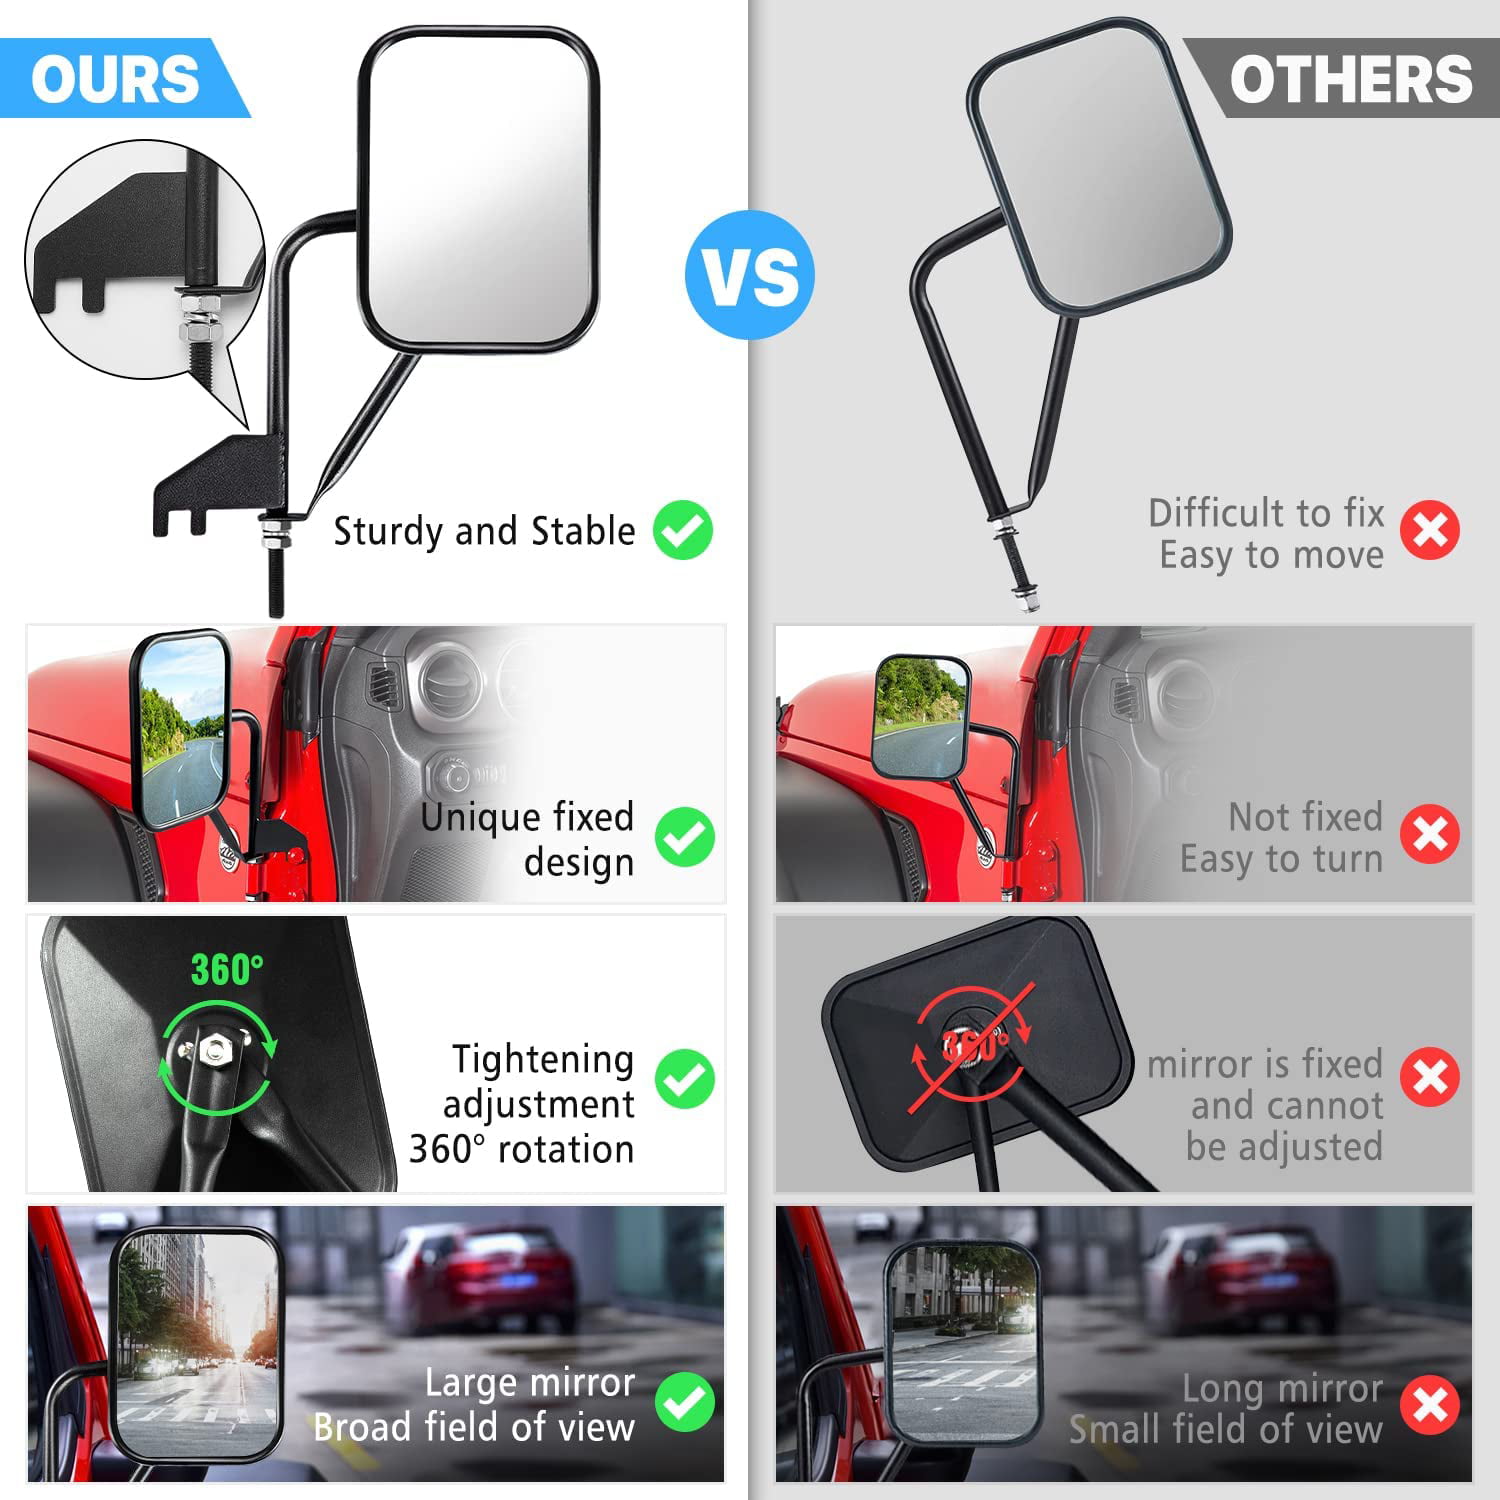 for Jeep Mirrors Doors Off Side Mirrors with Doors Off Compatible with Jeep Wrangler JL 2019-2021 Help Us Wider View and Safe Driving Easy to Install and More Fixed for Jeep Mirrors 